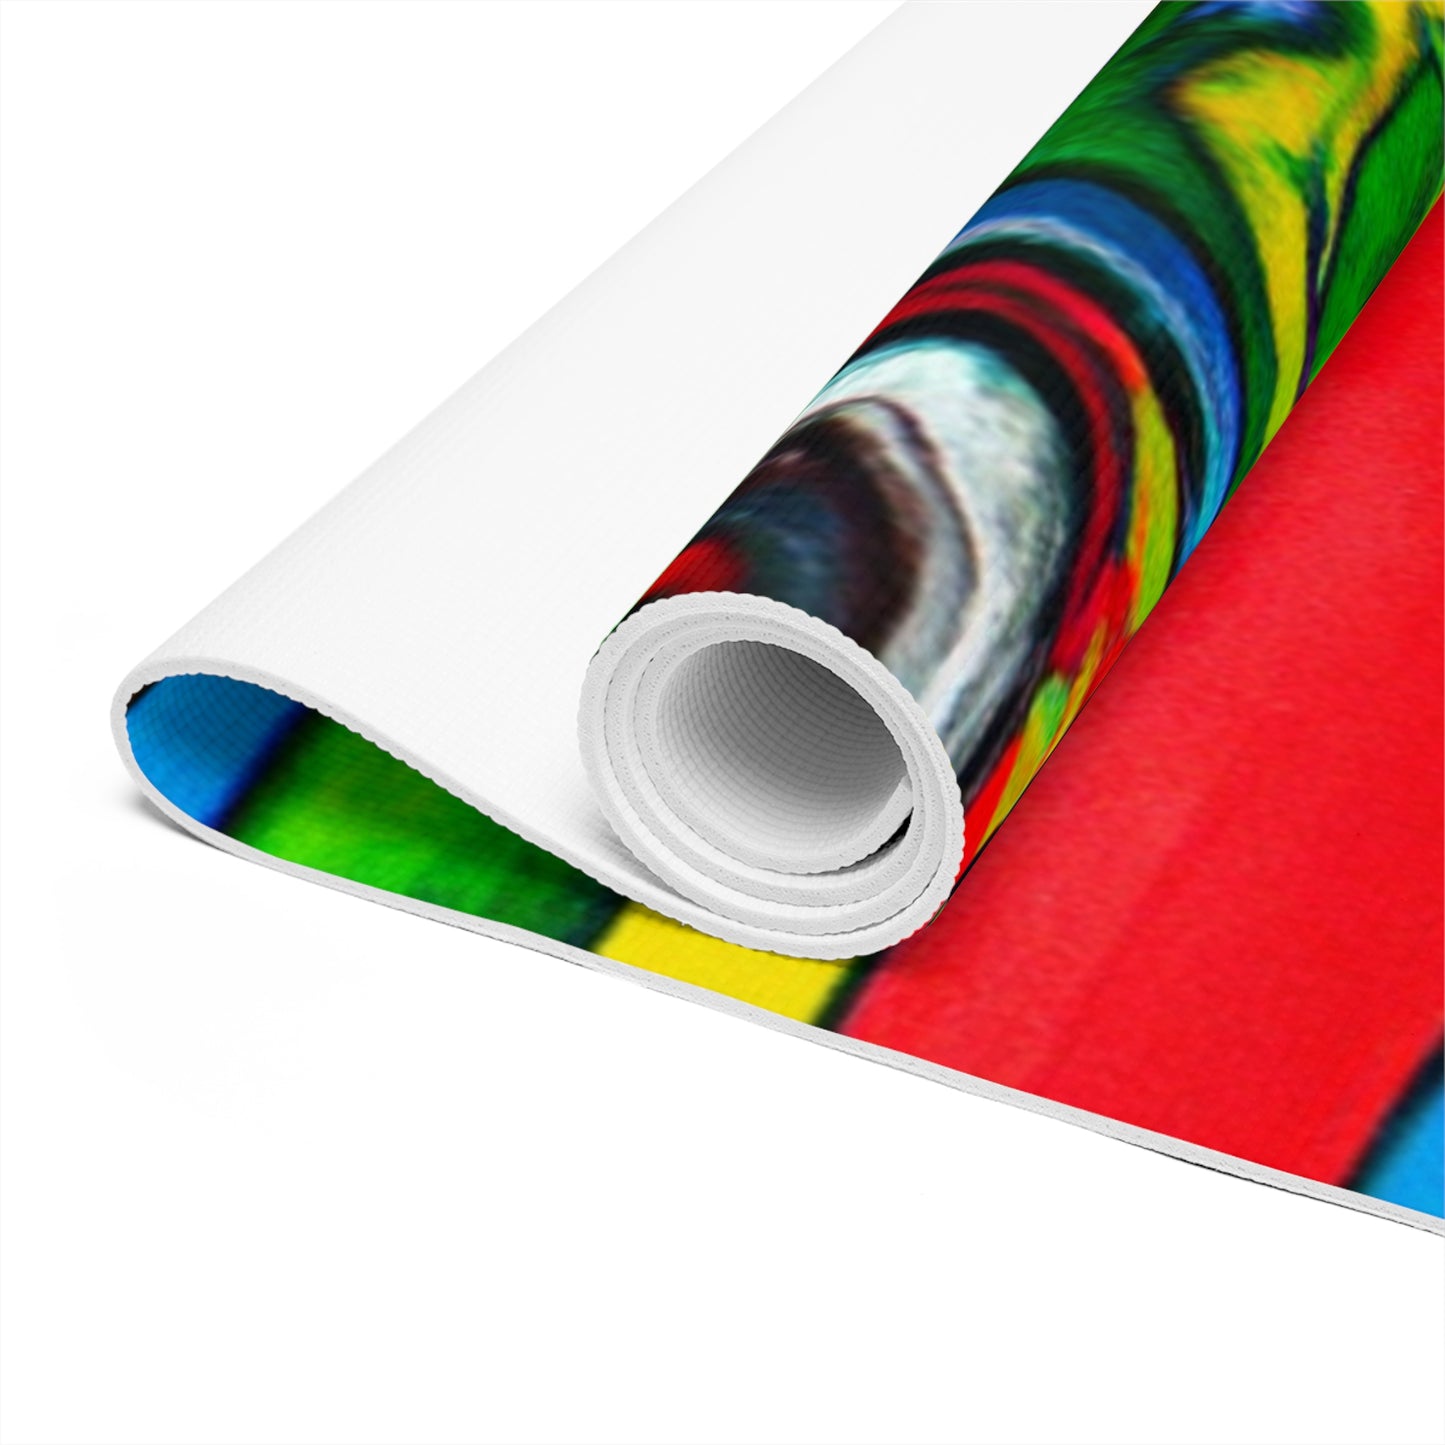 "Energized Sports Art: Capturing the Motion of the Game" - Go Plus Foam Yoga Mat